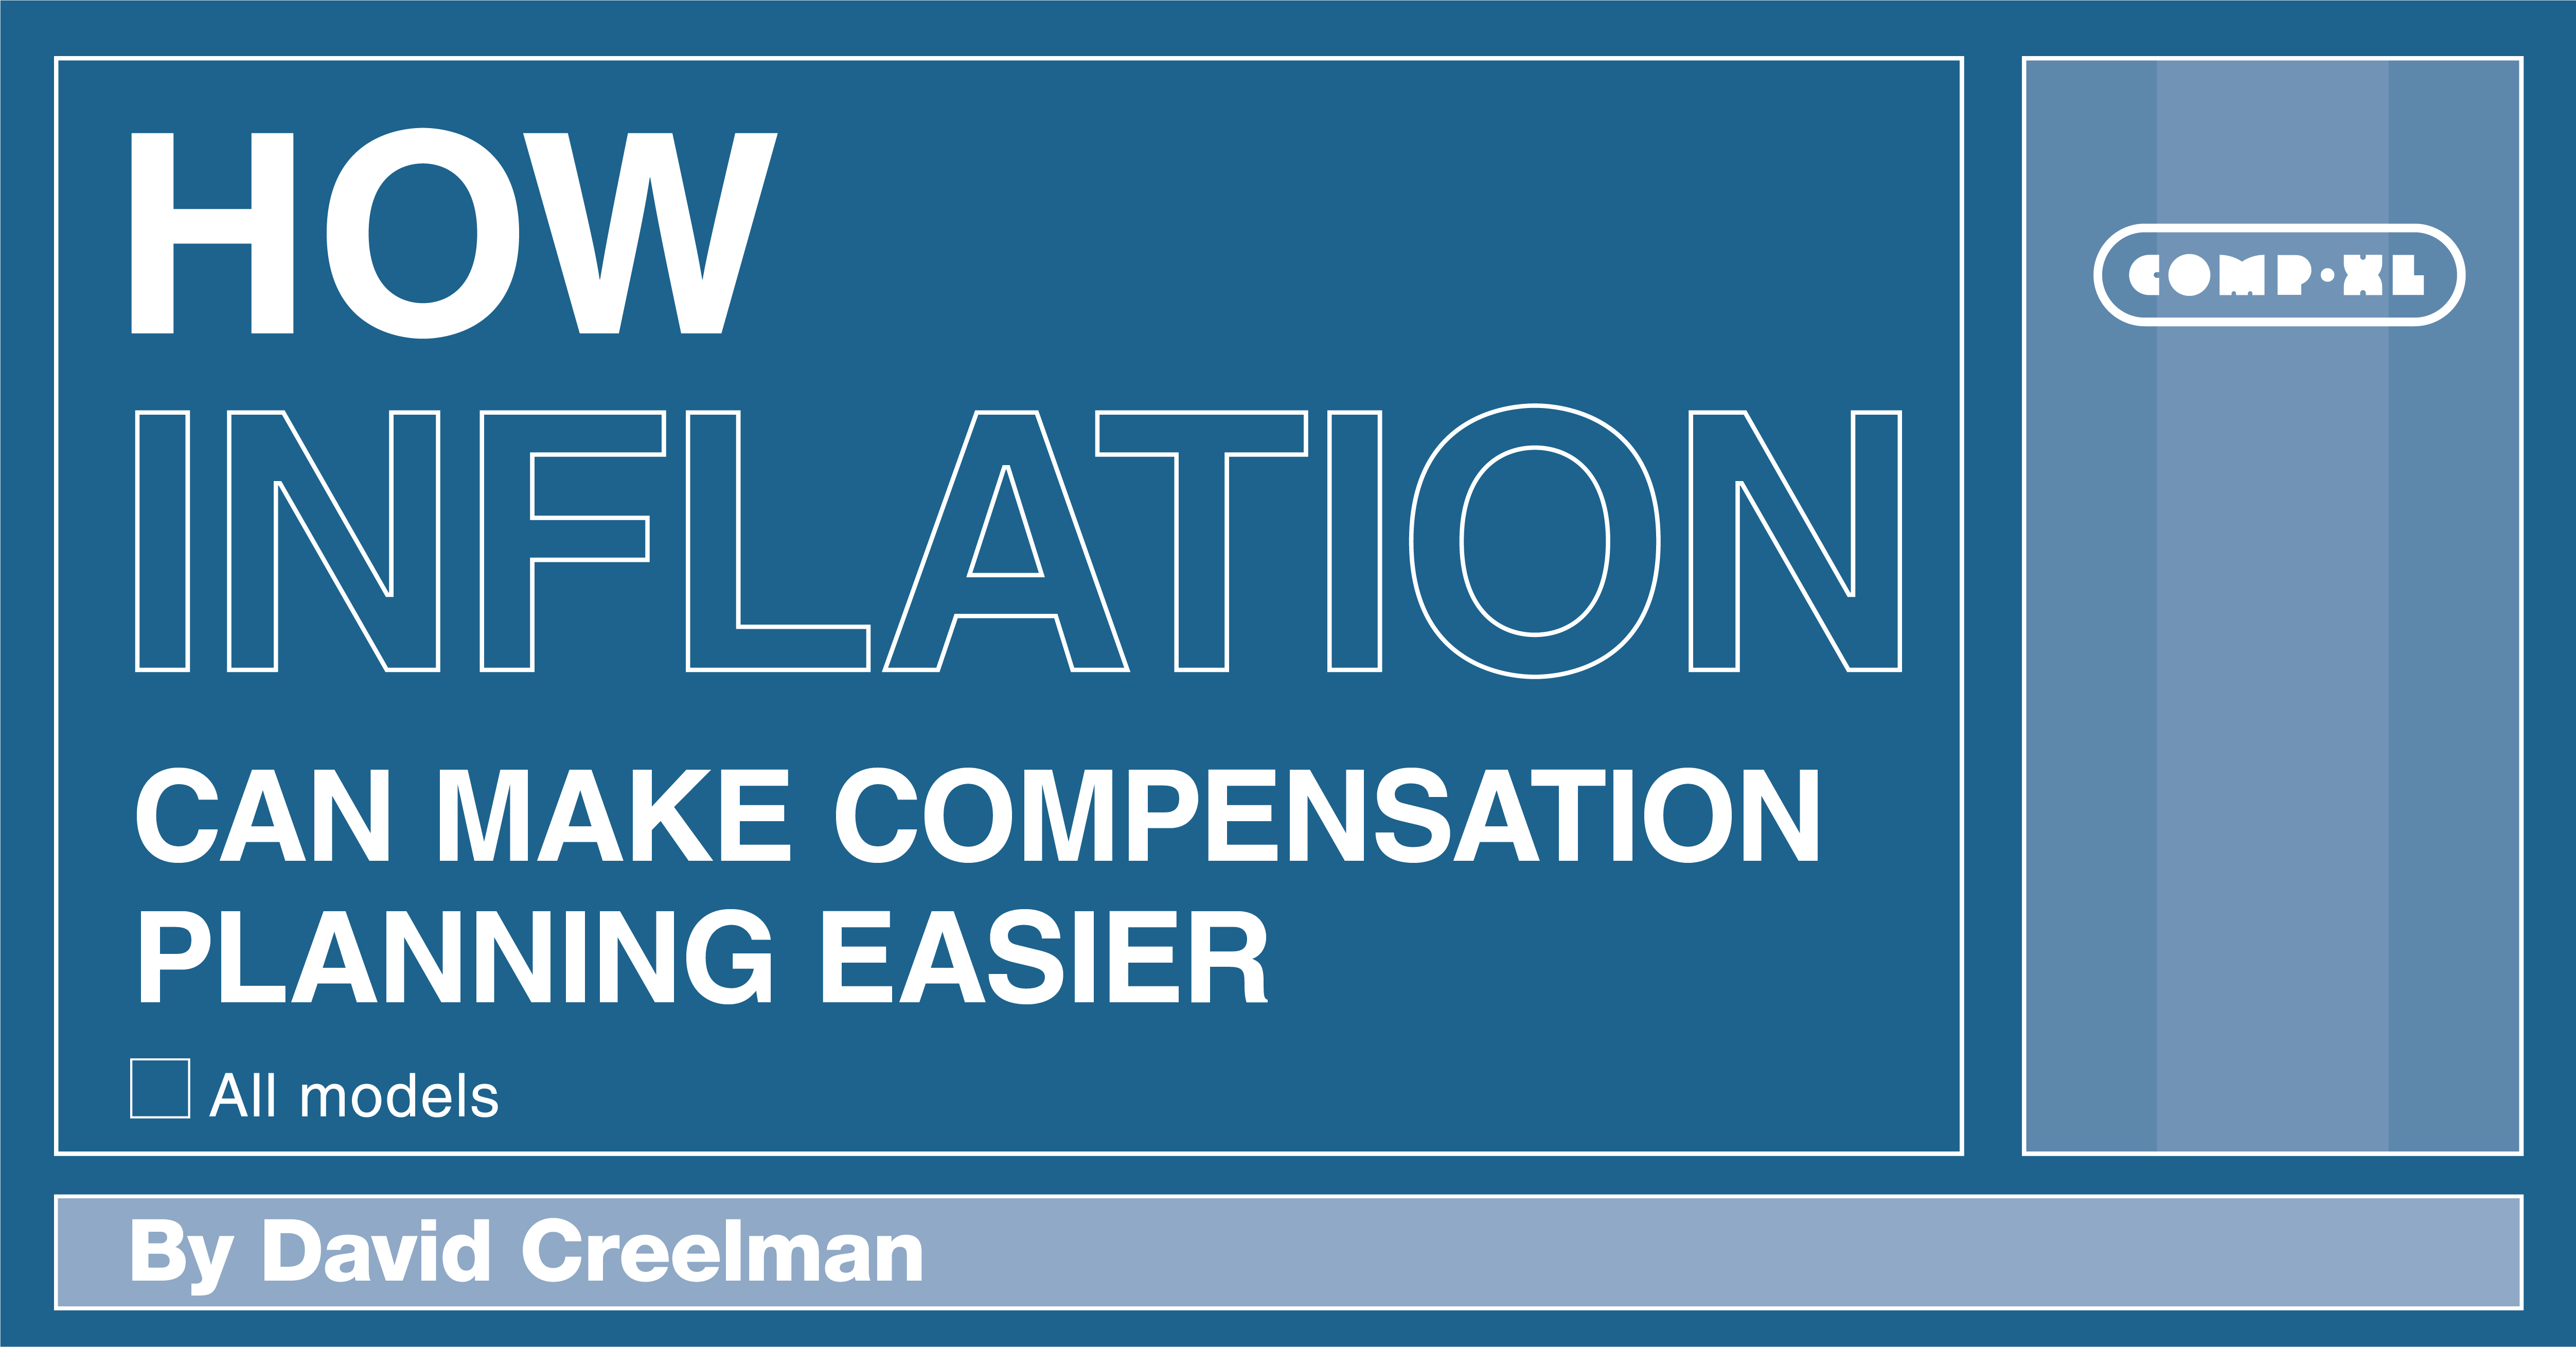 How Inflation Can Make Compensation Planning Easier Graphic Card